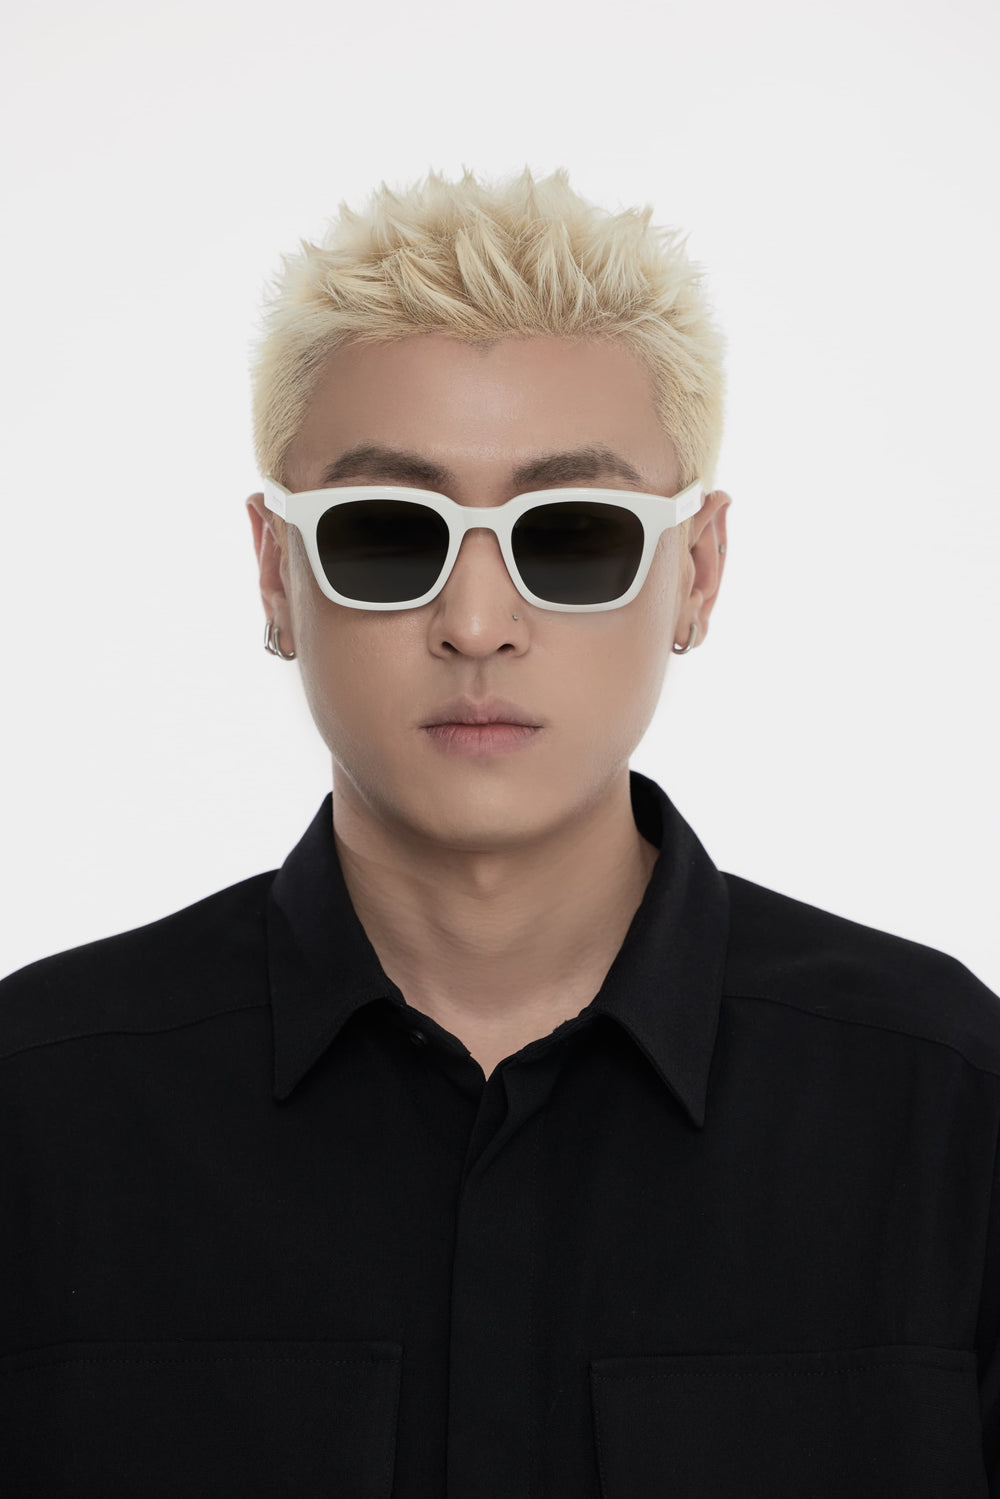 Male Model of his front face wearing Bubblegum in white square trendy sunglasses from Mercury Retrograde Daydream Collection 